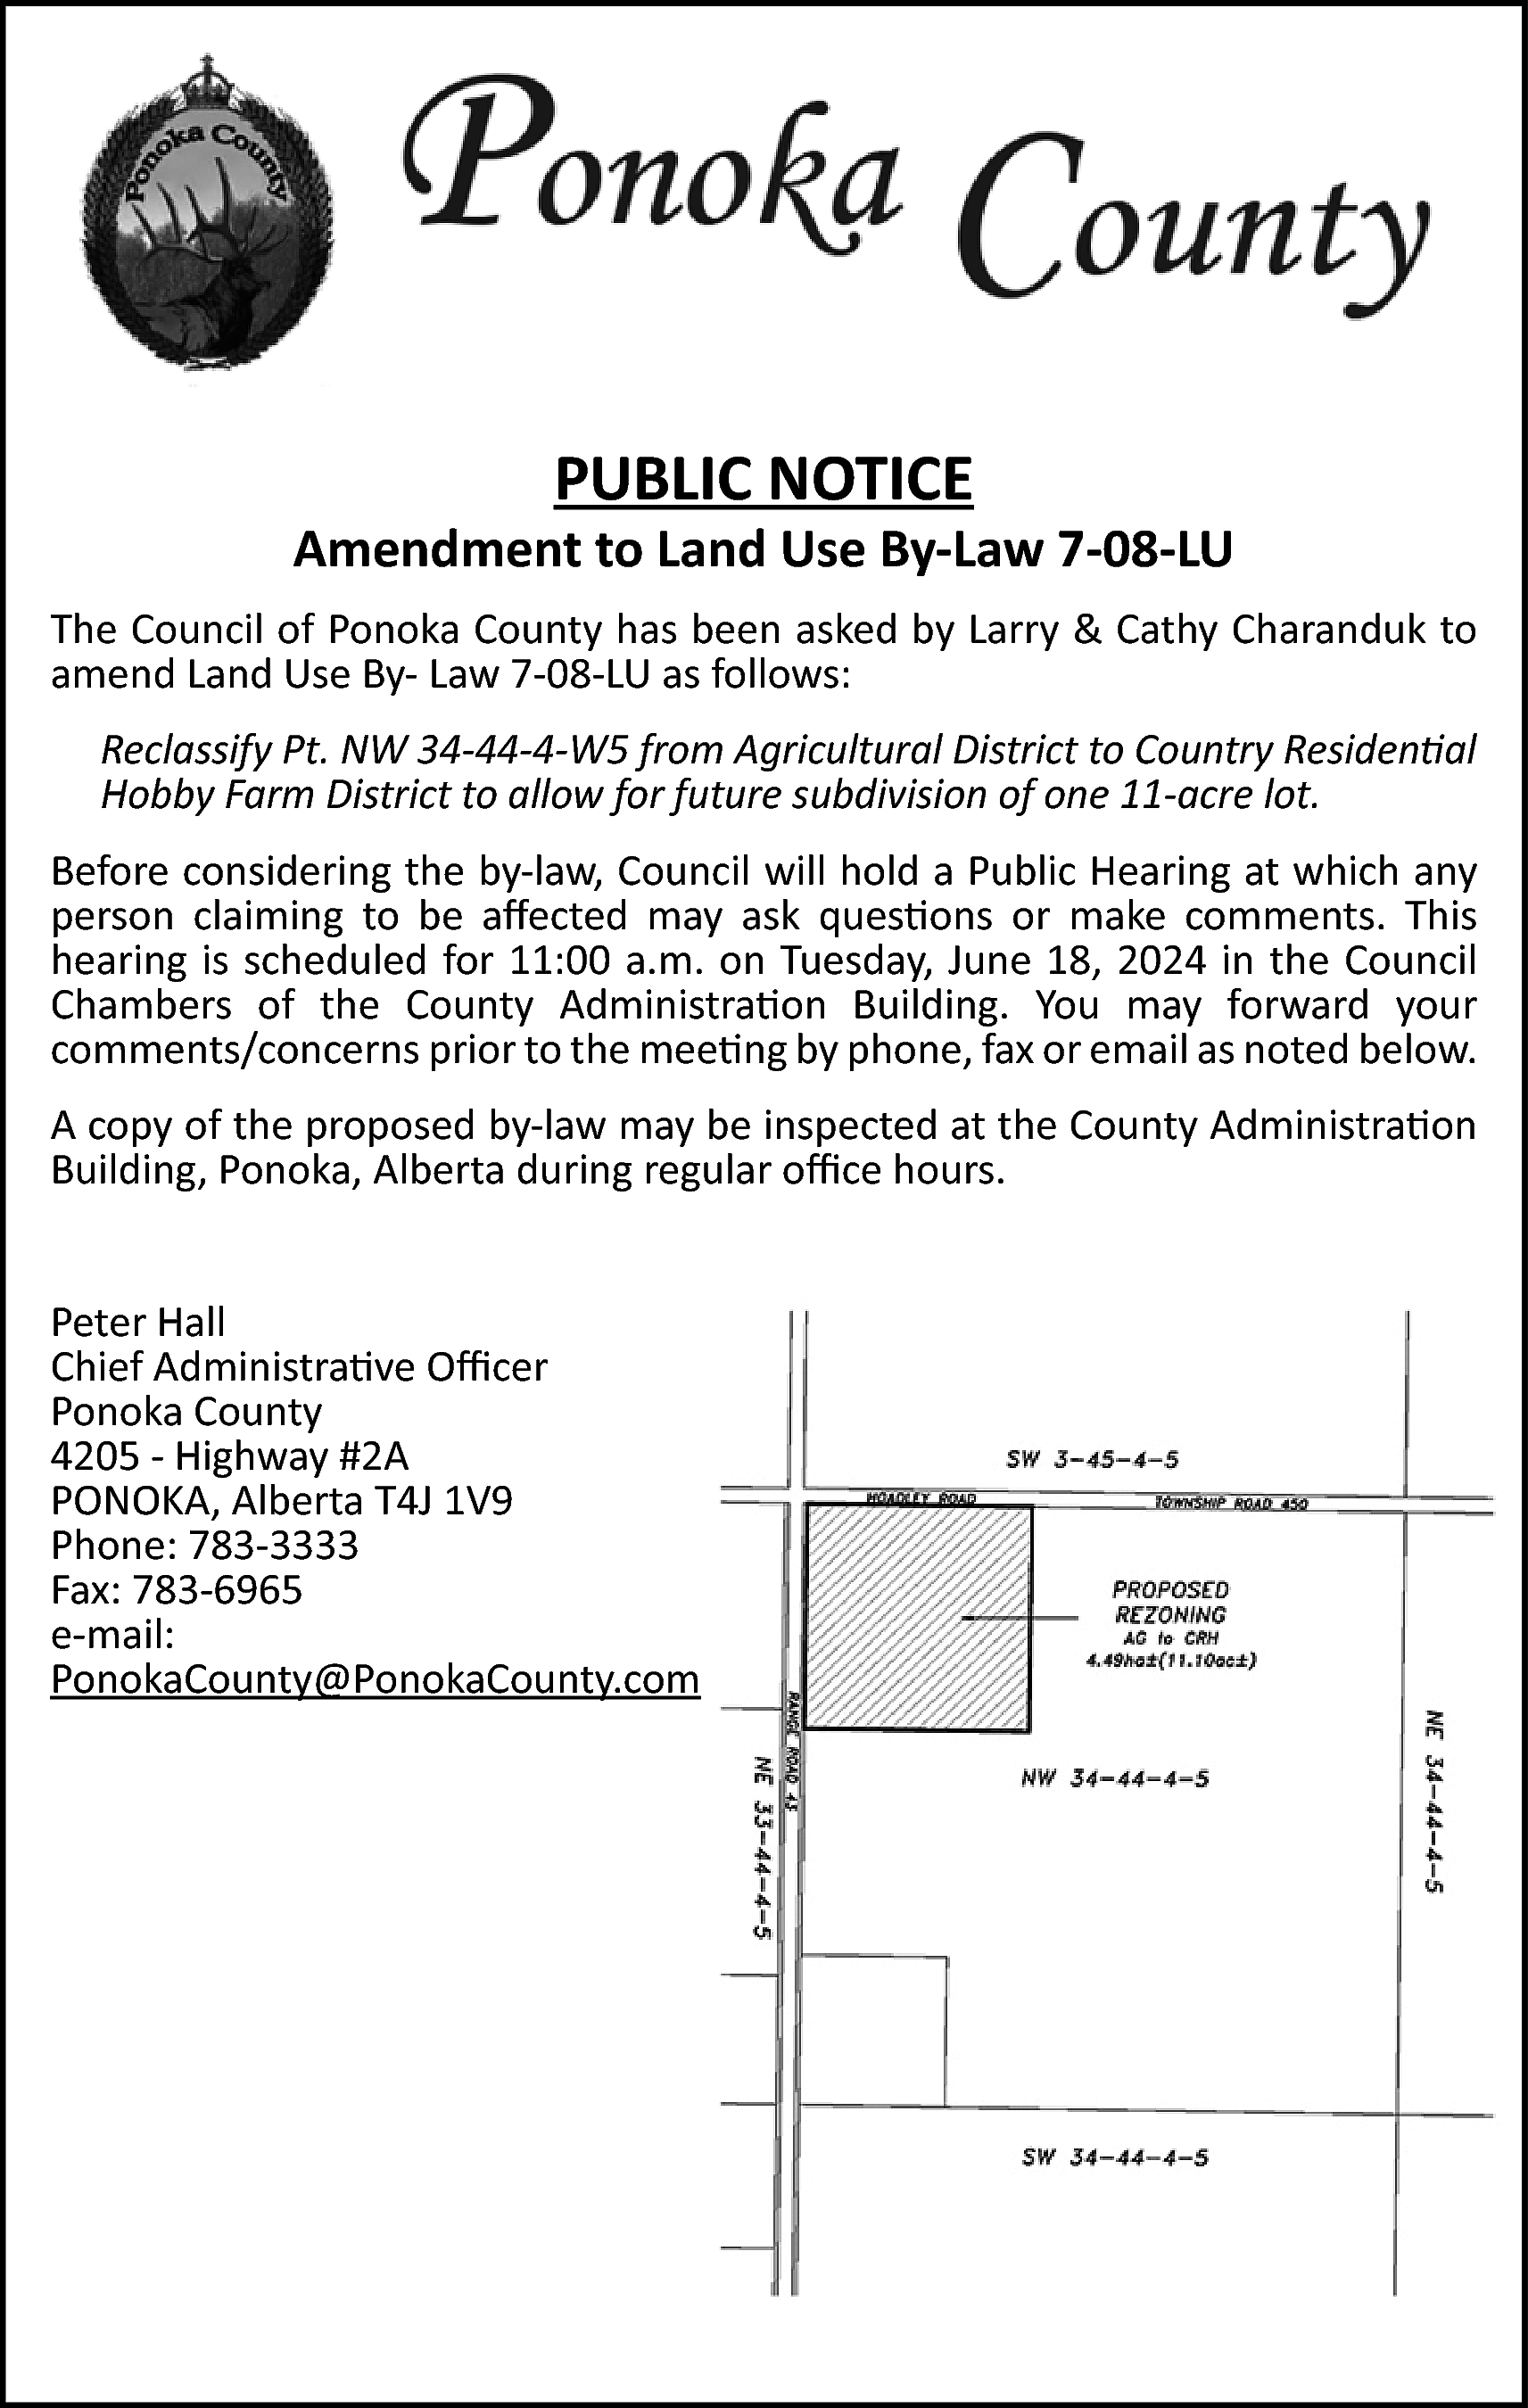 PUBLIC NOTICE <br> <br>Amendment to  PUBLIC NOTICE    Amendment to Land Use By-Law 7-08-LU  The Council of Ponoka County has been asked by Larry & Cathy Charanduk to  amend Land Use By- Law 7-08-LU as follows:  Reclassify Pt. NW 34-44-4-W5 from Agricultural District to Country Residential  Hobby Farm District to allow for future subdivision of one 11-acre lot.  Before considering the by-law, Council will hold a Public Hearing at which any  person claiming to be affected may ask questions or make comments. This  hearing is scheduled for 11:00 a.m. on Tuesday, June 18, 2024 in the Council  Chambers of the County Administration Building. You may forward your  comments/concerns prior to the meeting by phone, fax or email as noted below.  A copy of the proposed by-law may be inspected at the County Administration  Building, Ponoka, Alberta during regular office hours.  Peter Hall  Chief Administrative Officer  Ponoka County  4205 - Highway #2A  PONOKA, Alberta T4J 1V9  Phone: 783-3333  Fax: 783-6965  e-mail:  PonokaCounty@PonokaCounty.com    